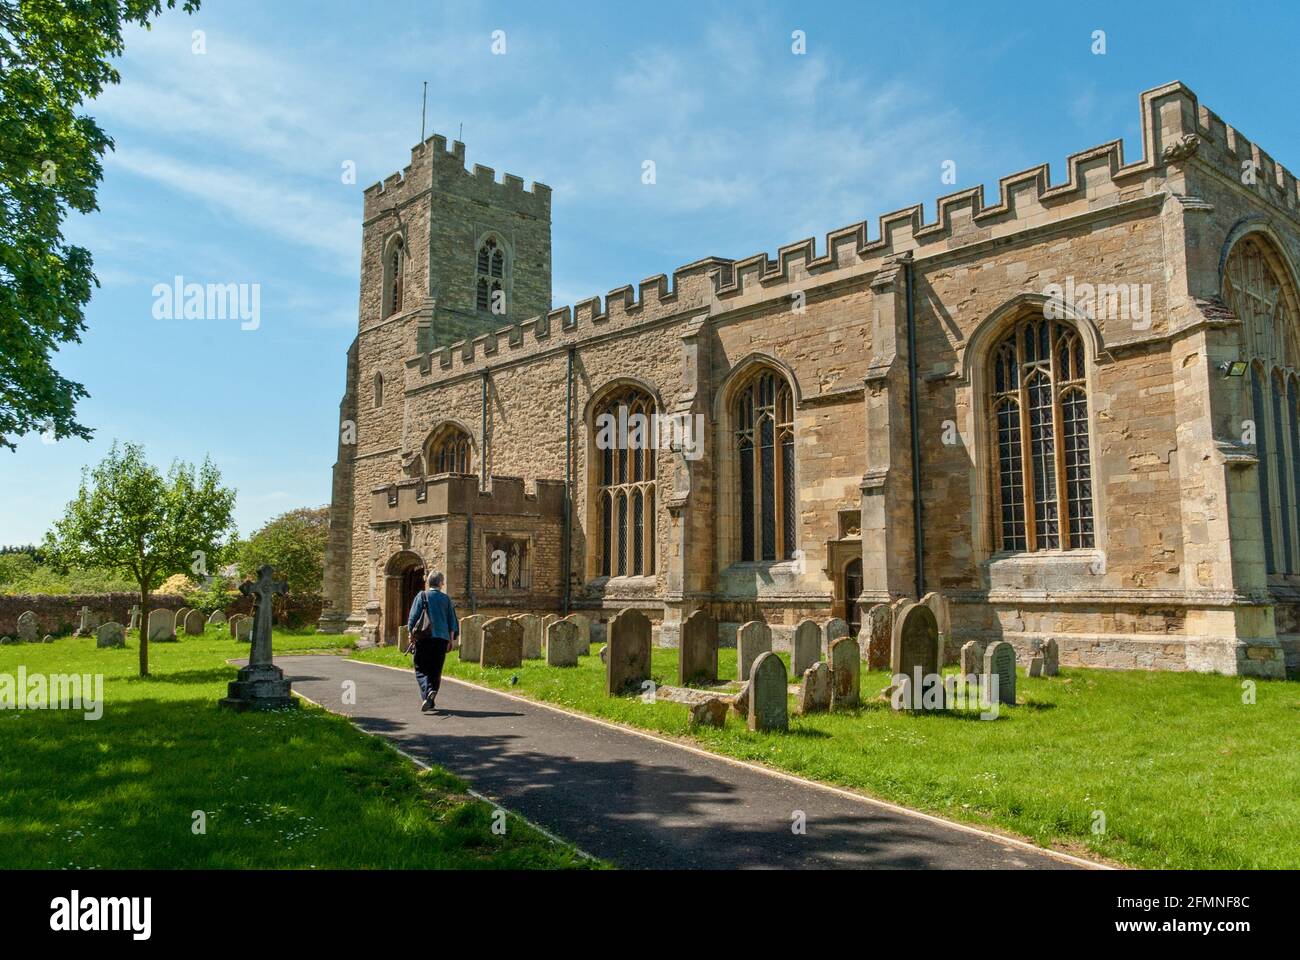 Parish church of St Lawrence in the village of Willington, Bedfordshire, UK; 16th century rebuild or restore by Sir John Gostwick Stock Photo